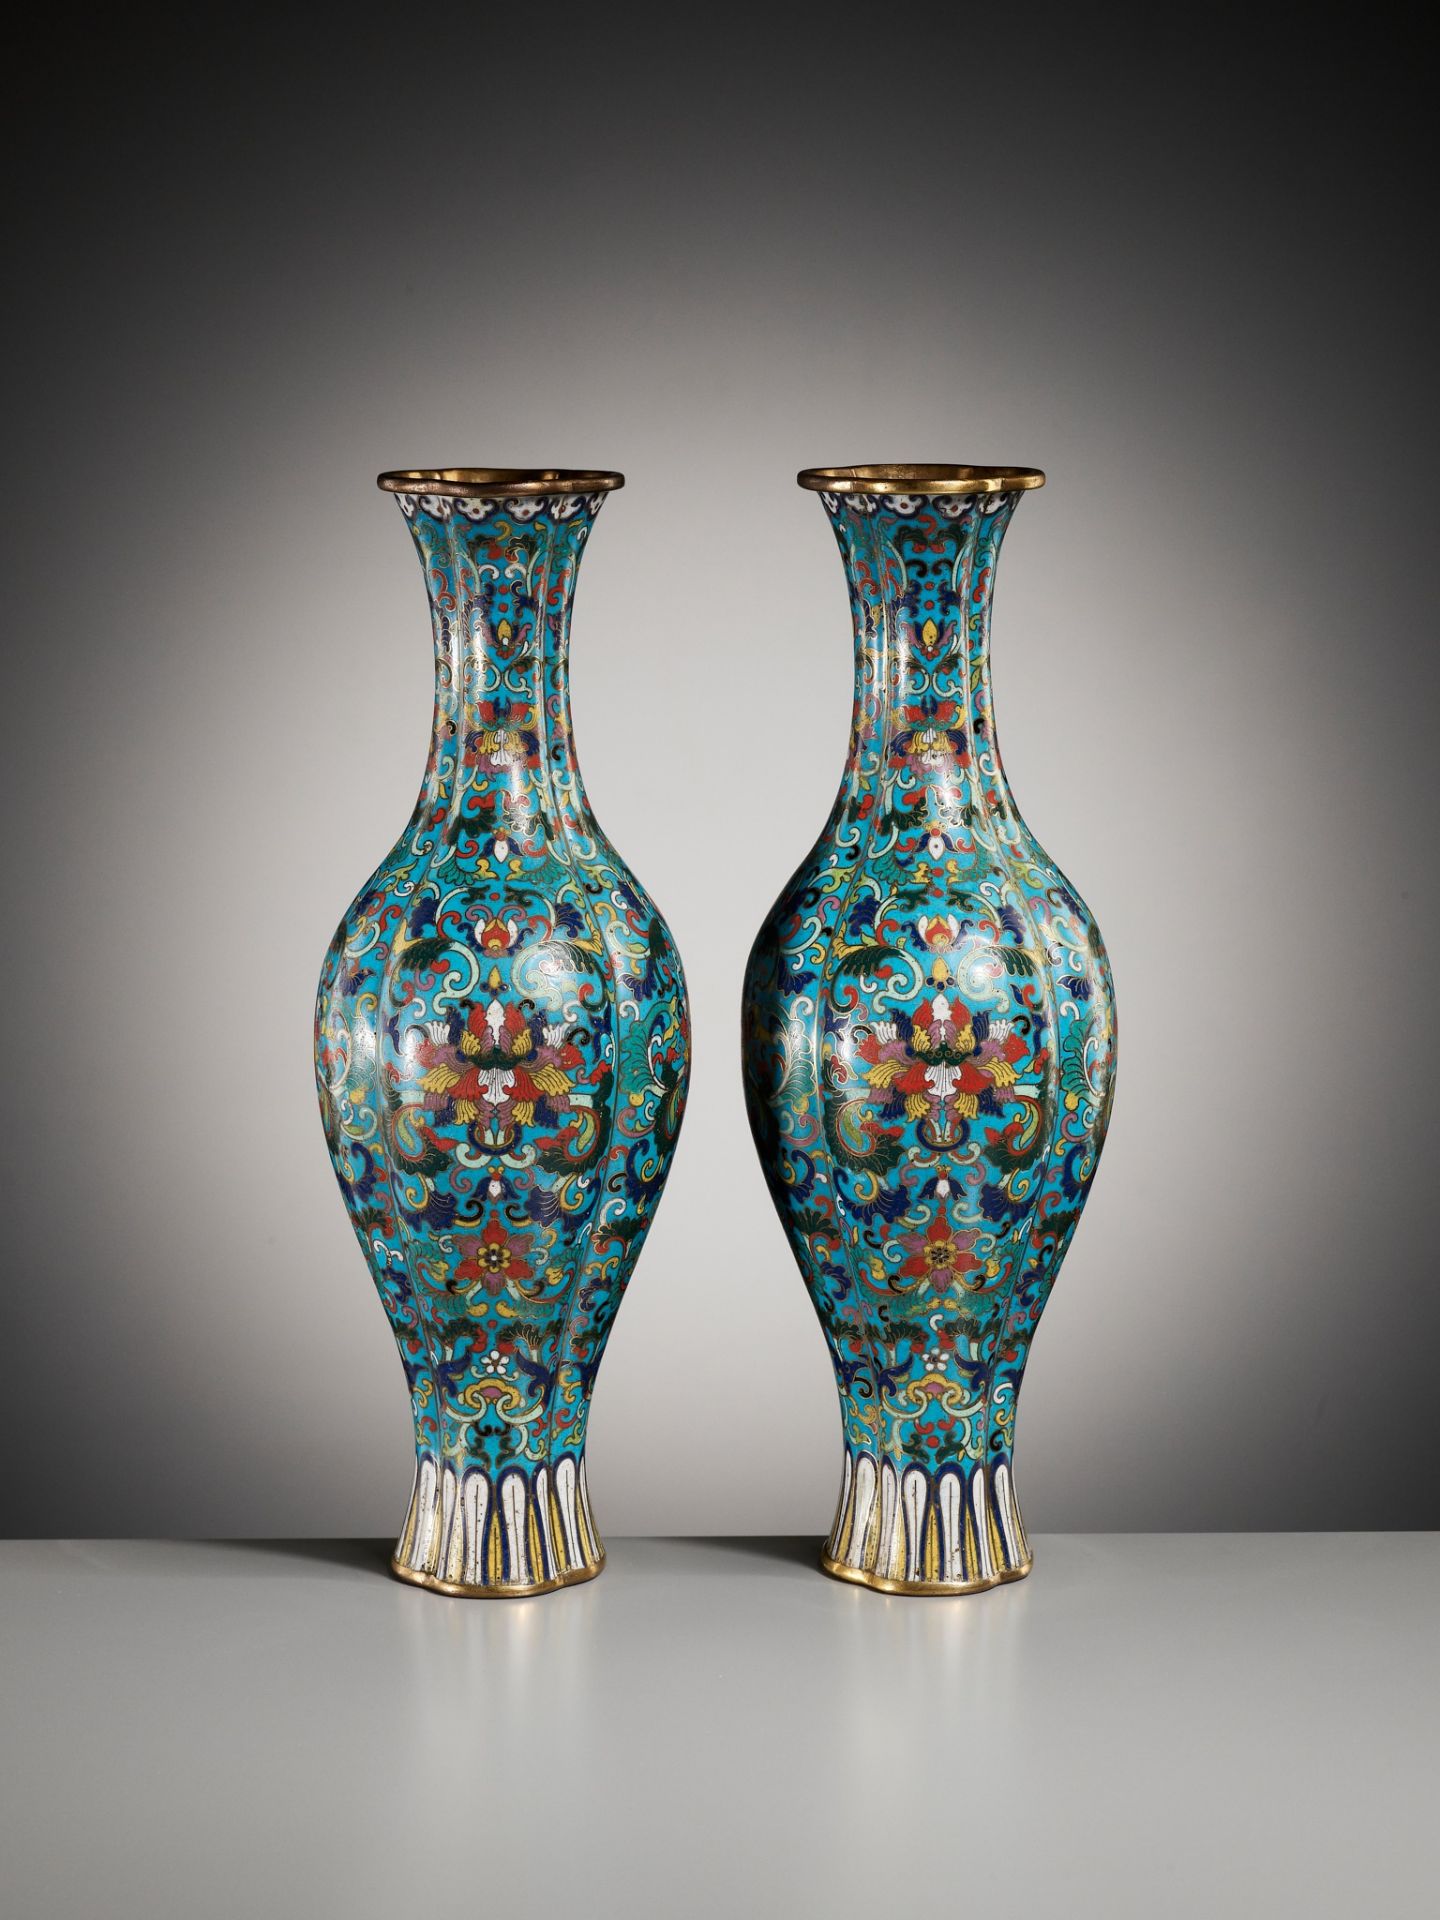 AN IMPERIAL PAIR OF QUADRILOBED CLOISONNÉ ENAMEL ‘LOTUS’ VASES, QIANLONG MARK AND OF THE PERIOD - Image 13 of 17